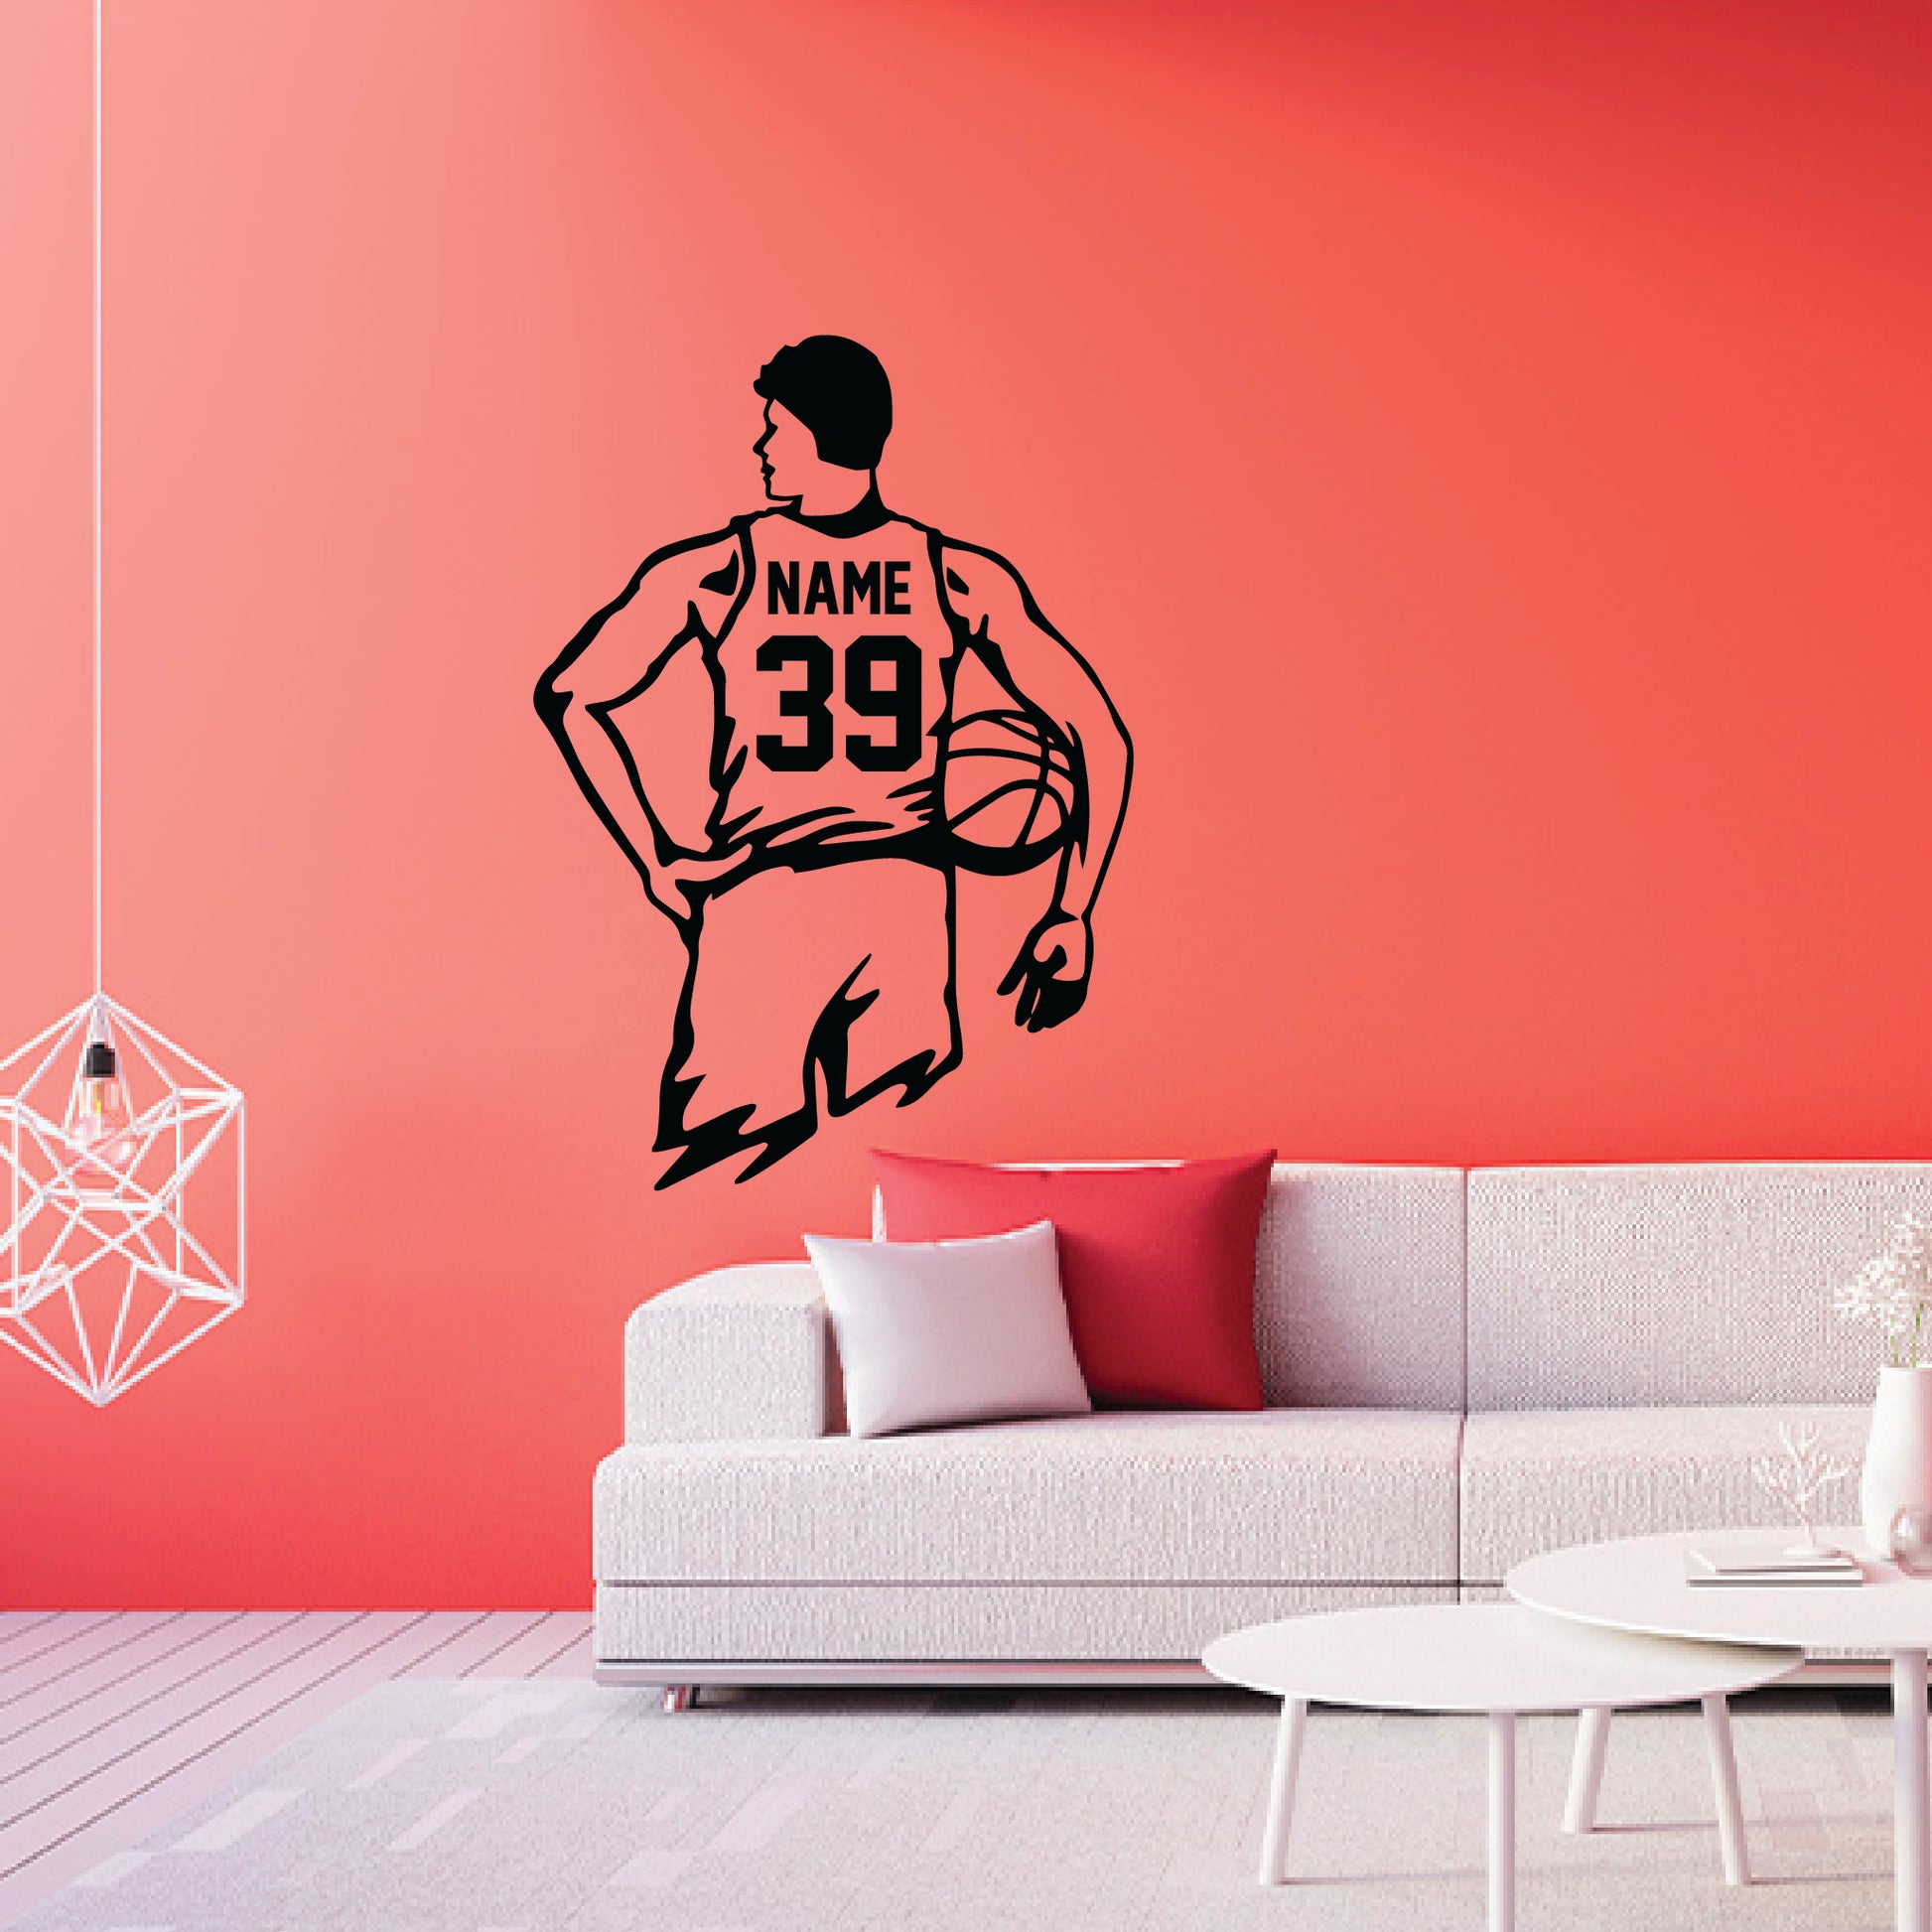 Personalized Basketball Player Wall Decal | Sportesi